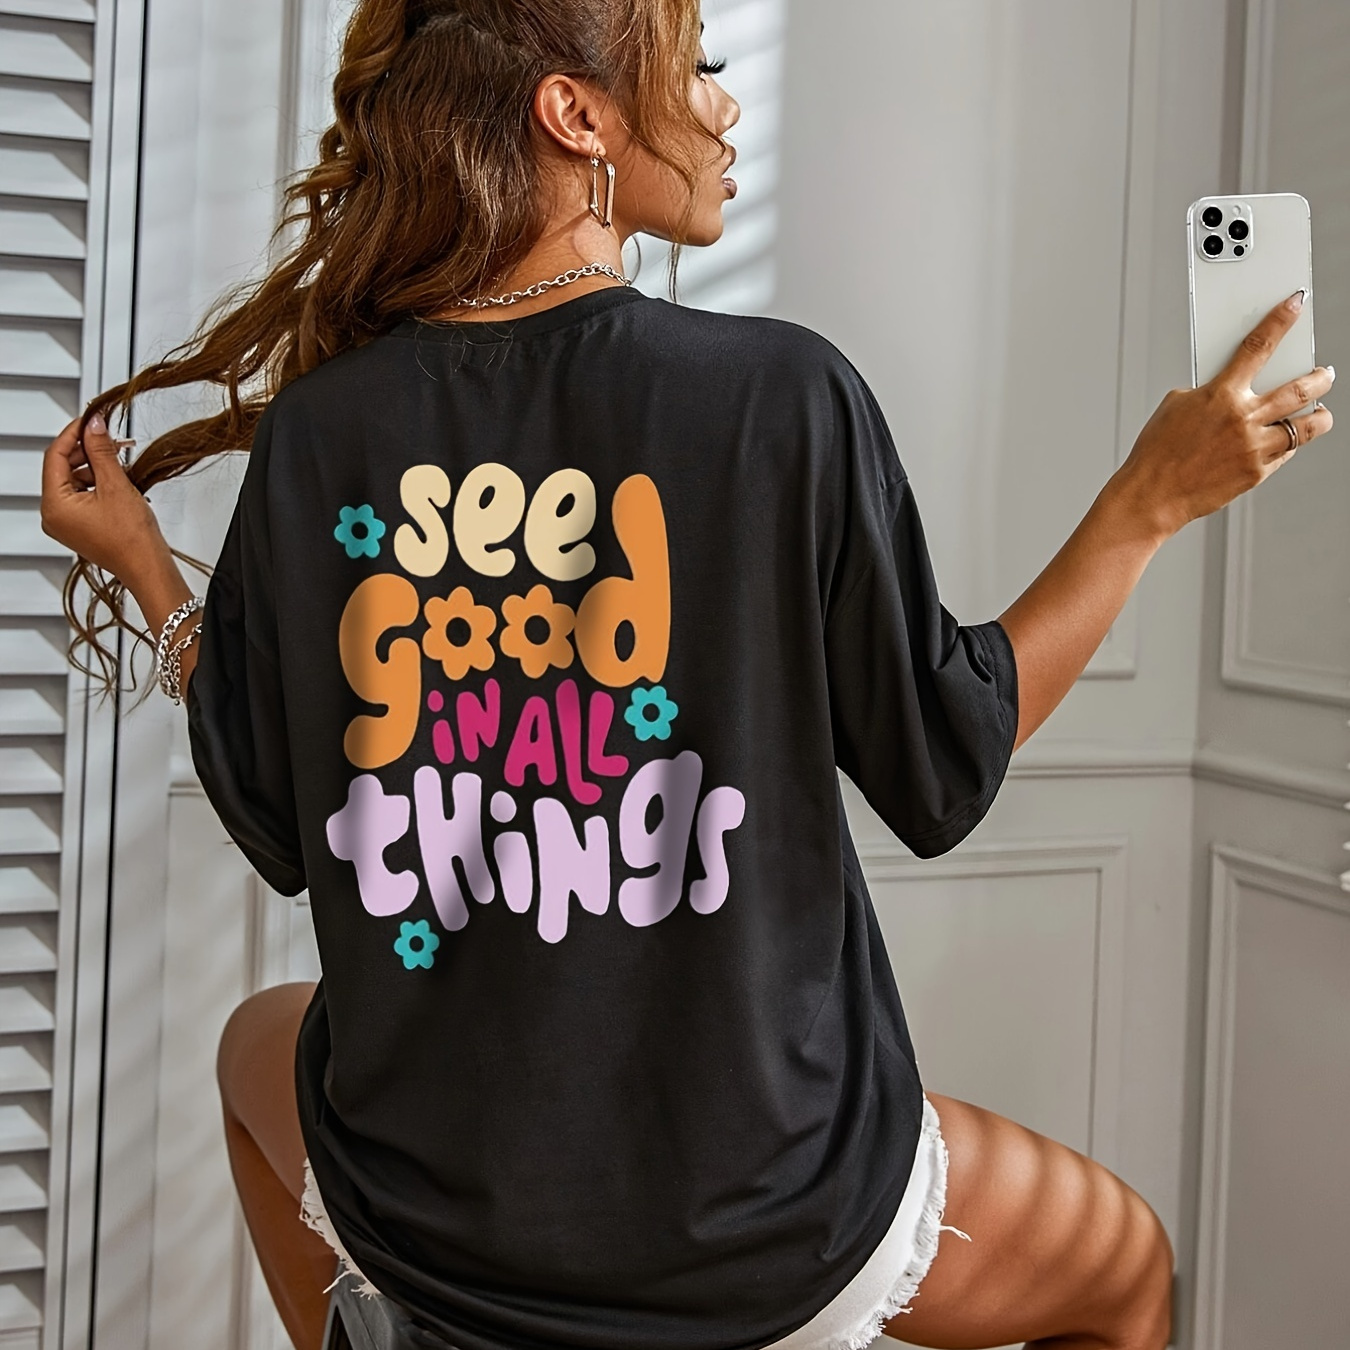 

Colorful Slogan Print Crew Neck T-shirt, Casual Short Sleeve Top For Spring & Summer, Women's Clothing